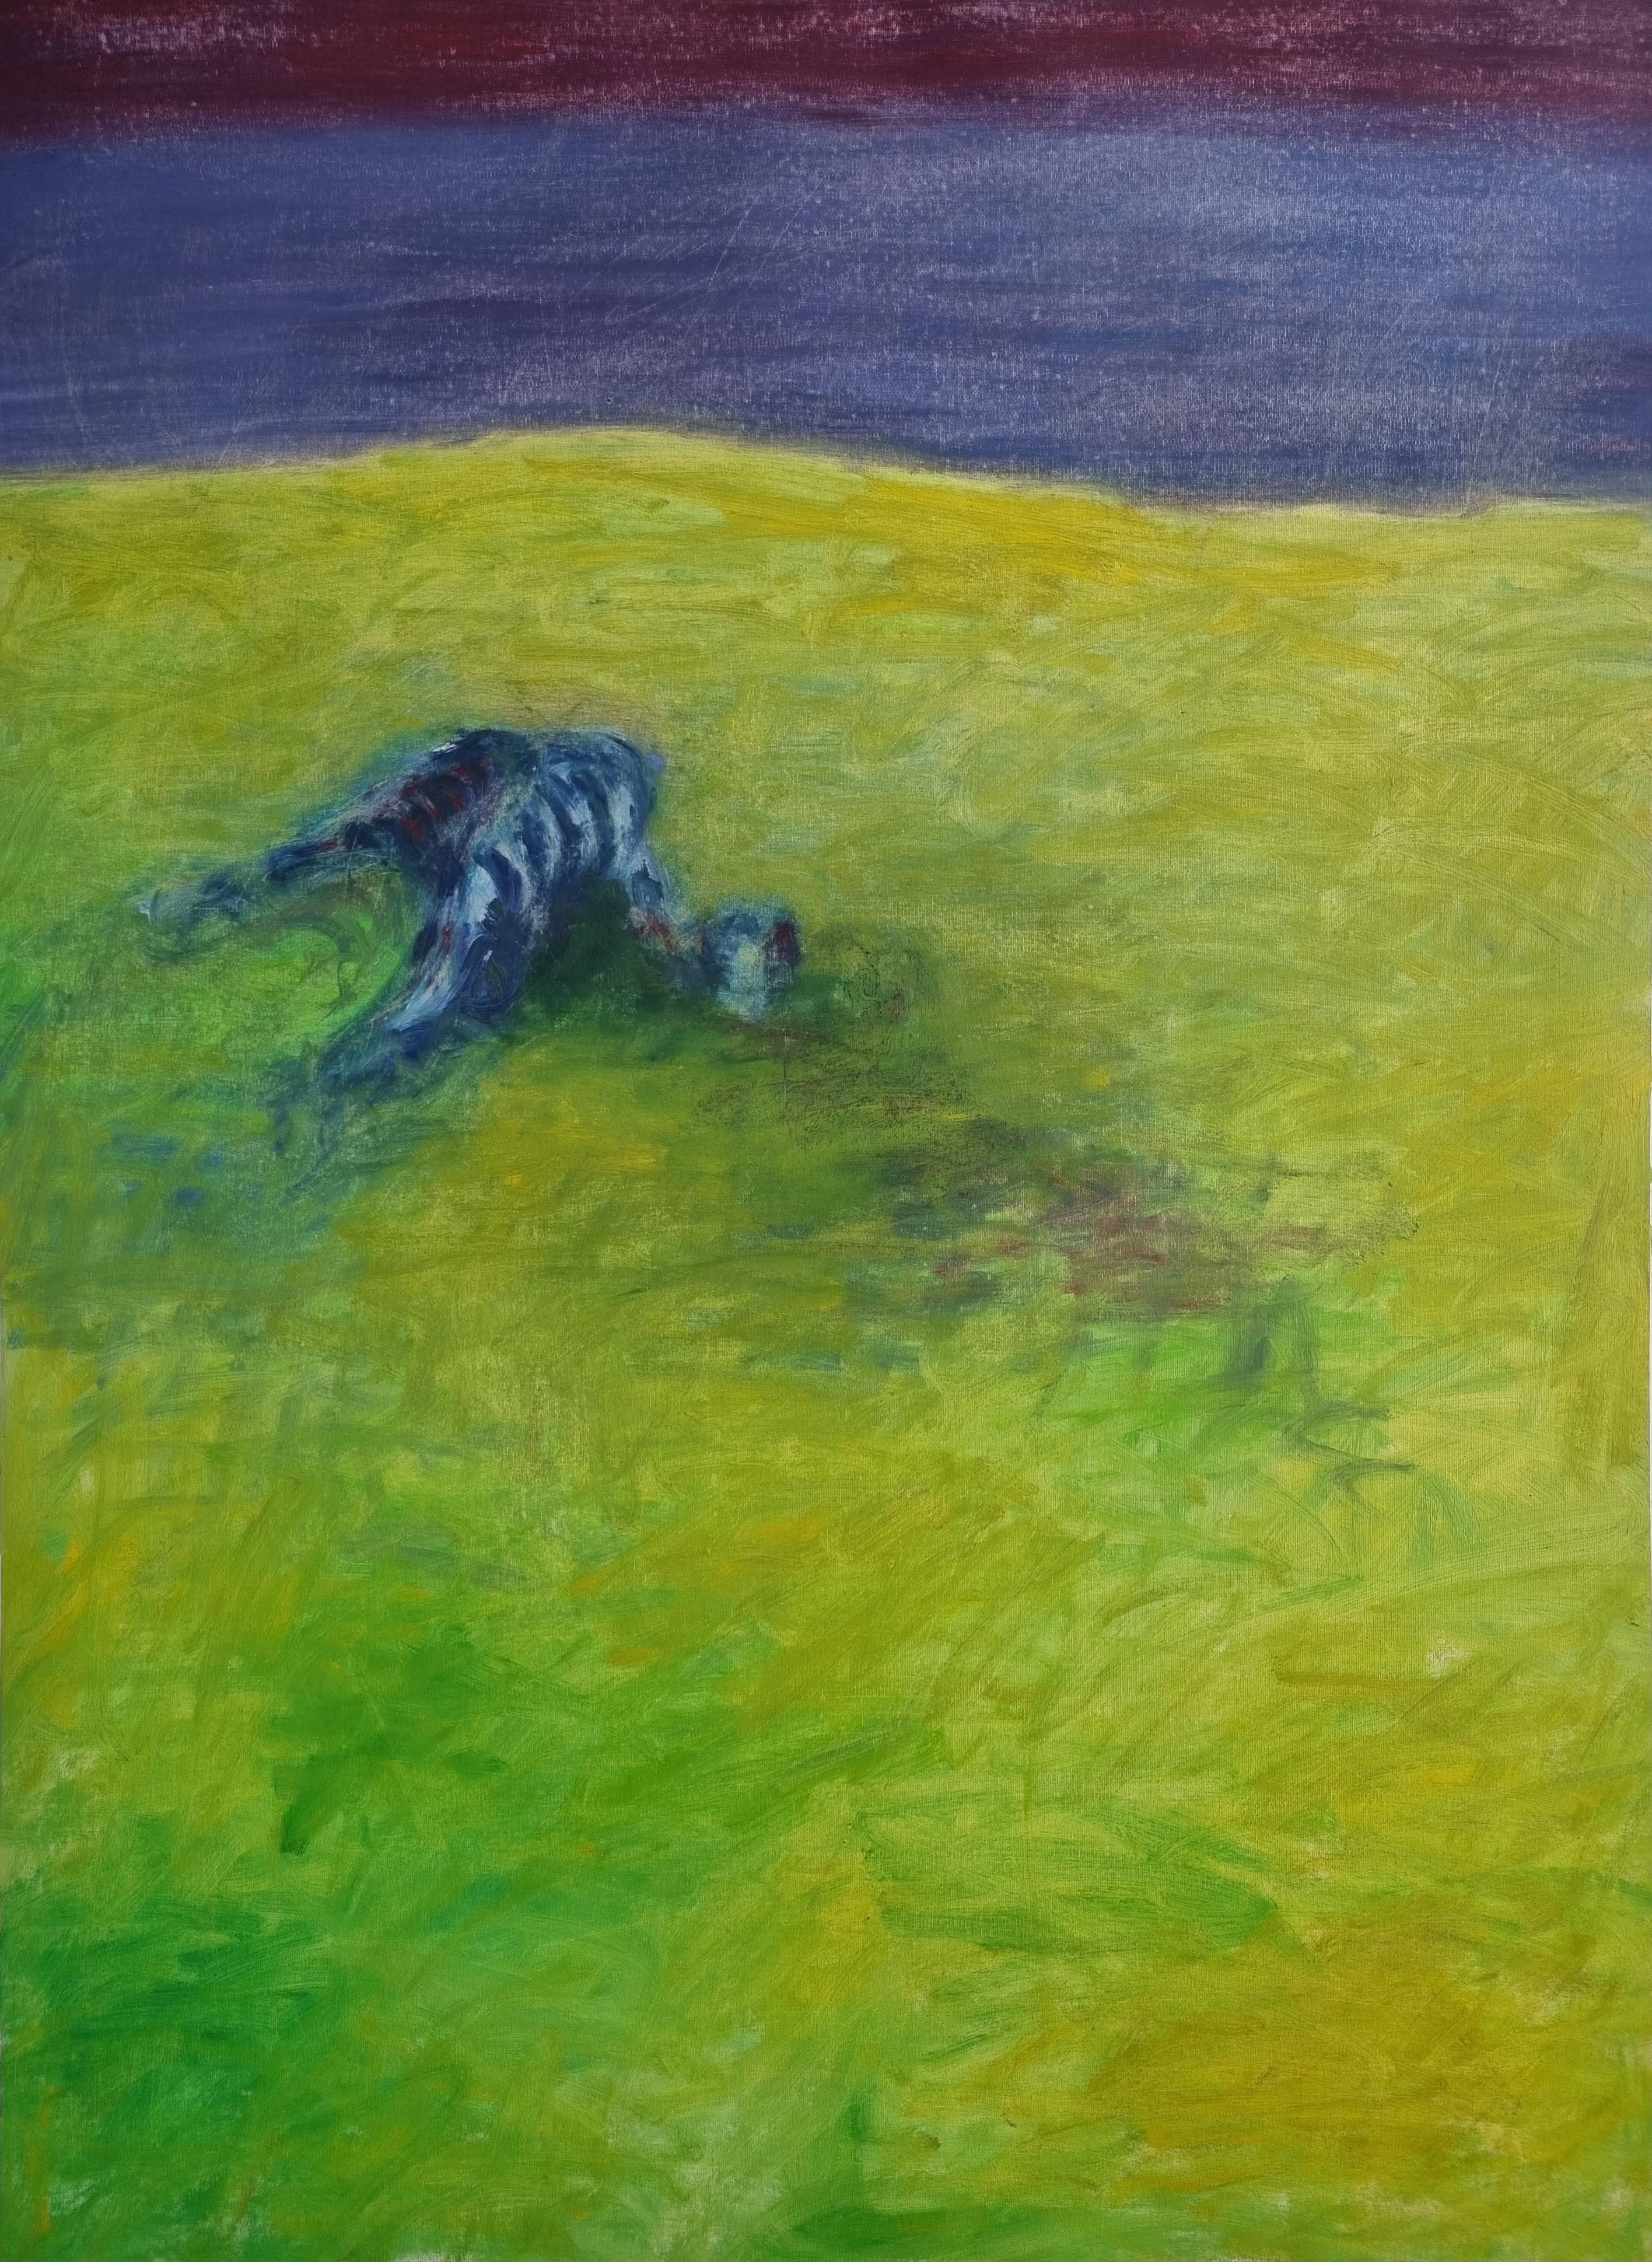 Zsolt Berszán Figurative Painting - Body in the Field 1 - 21st Century, Landscape, Green, Blue, Painting